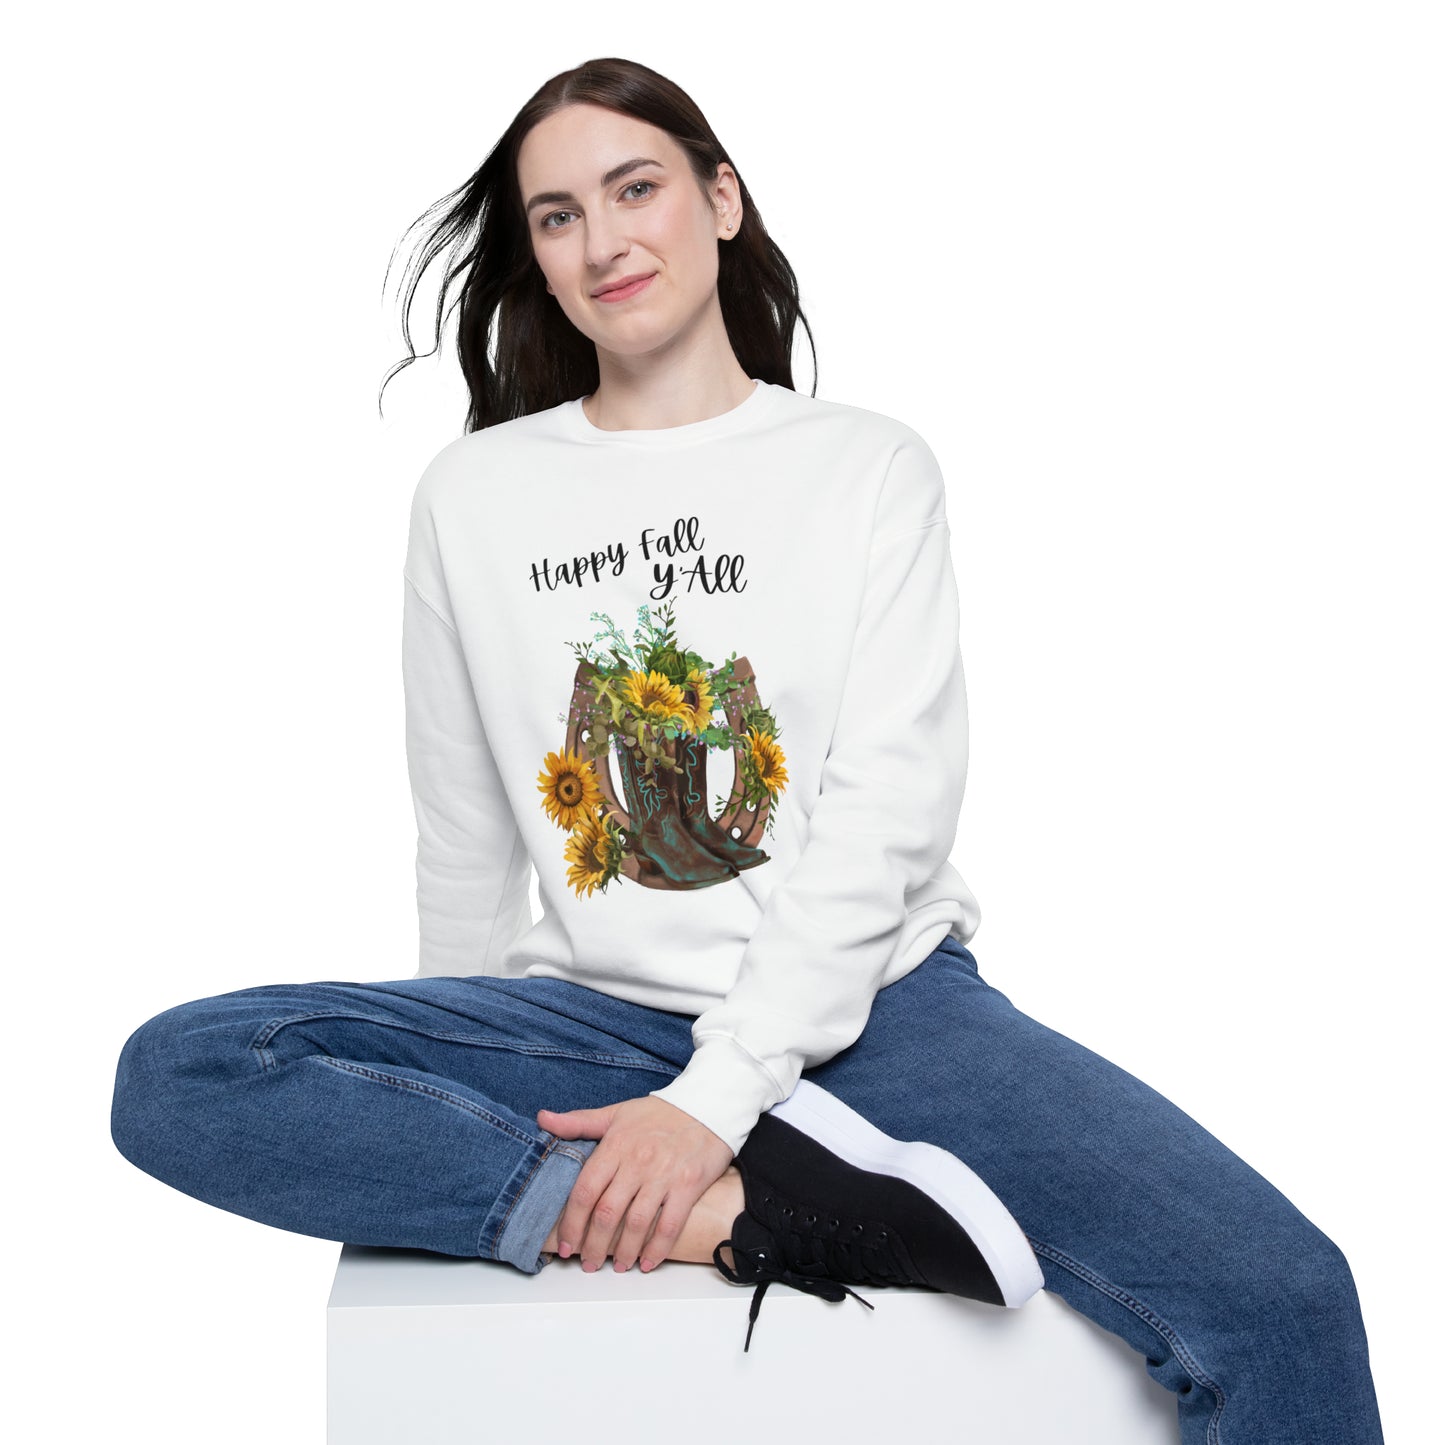 Happy Fall Y'All' Sweatshirt - Embrace Autumn in Comfort and Style with Country-Inspired Design - Unisex Drop Shoulder Sweatshirt